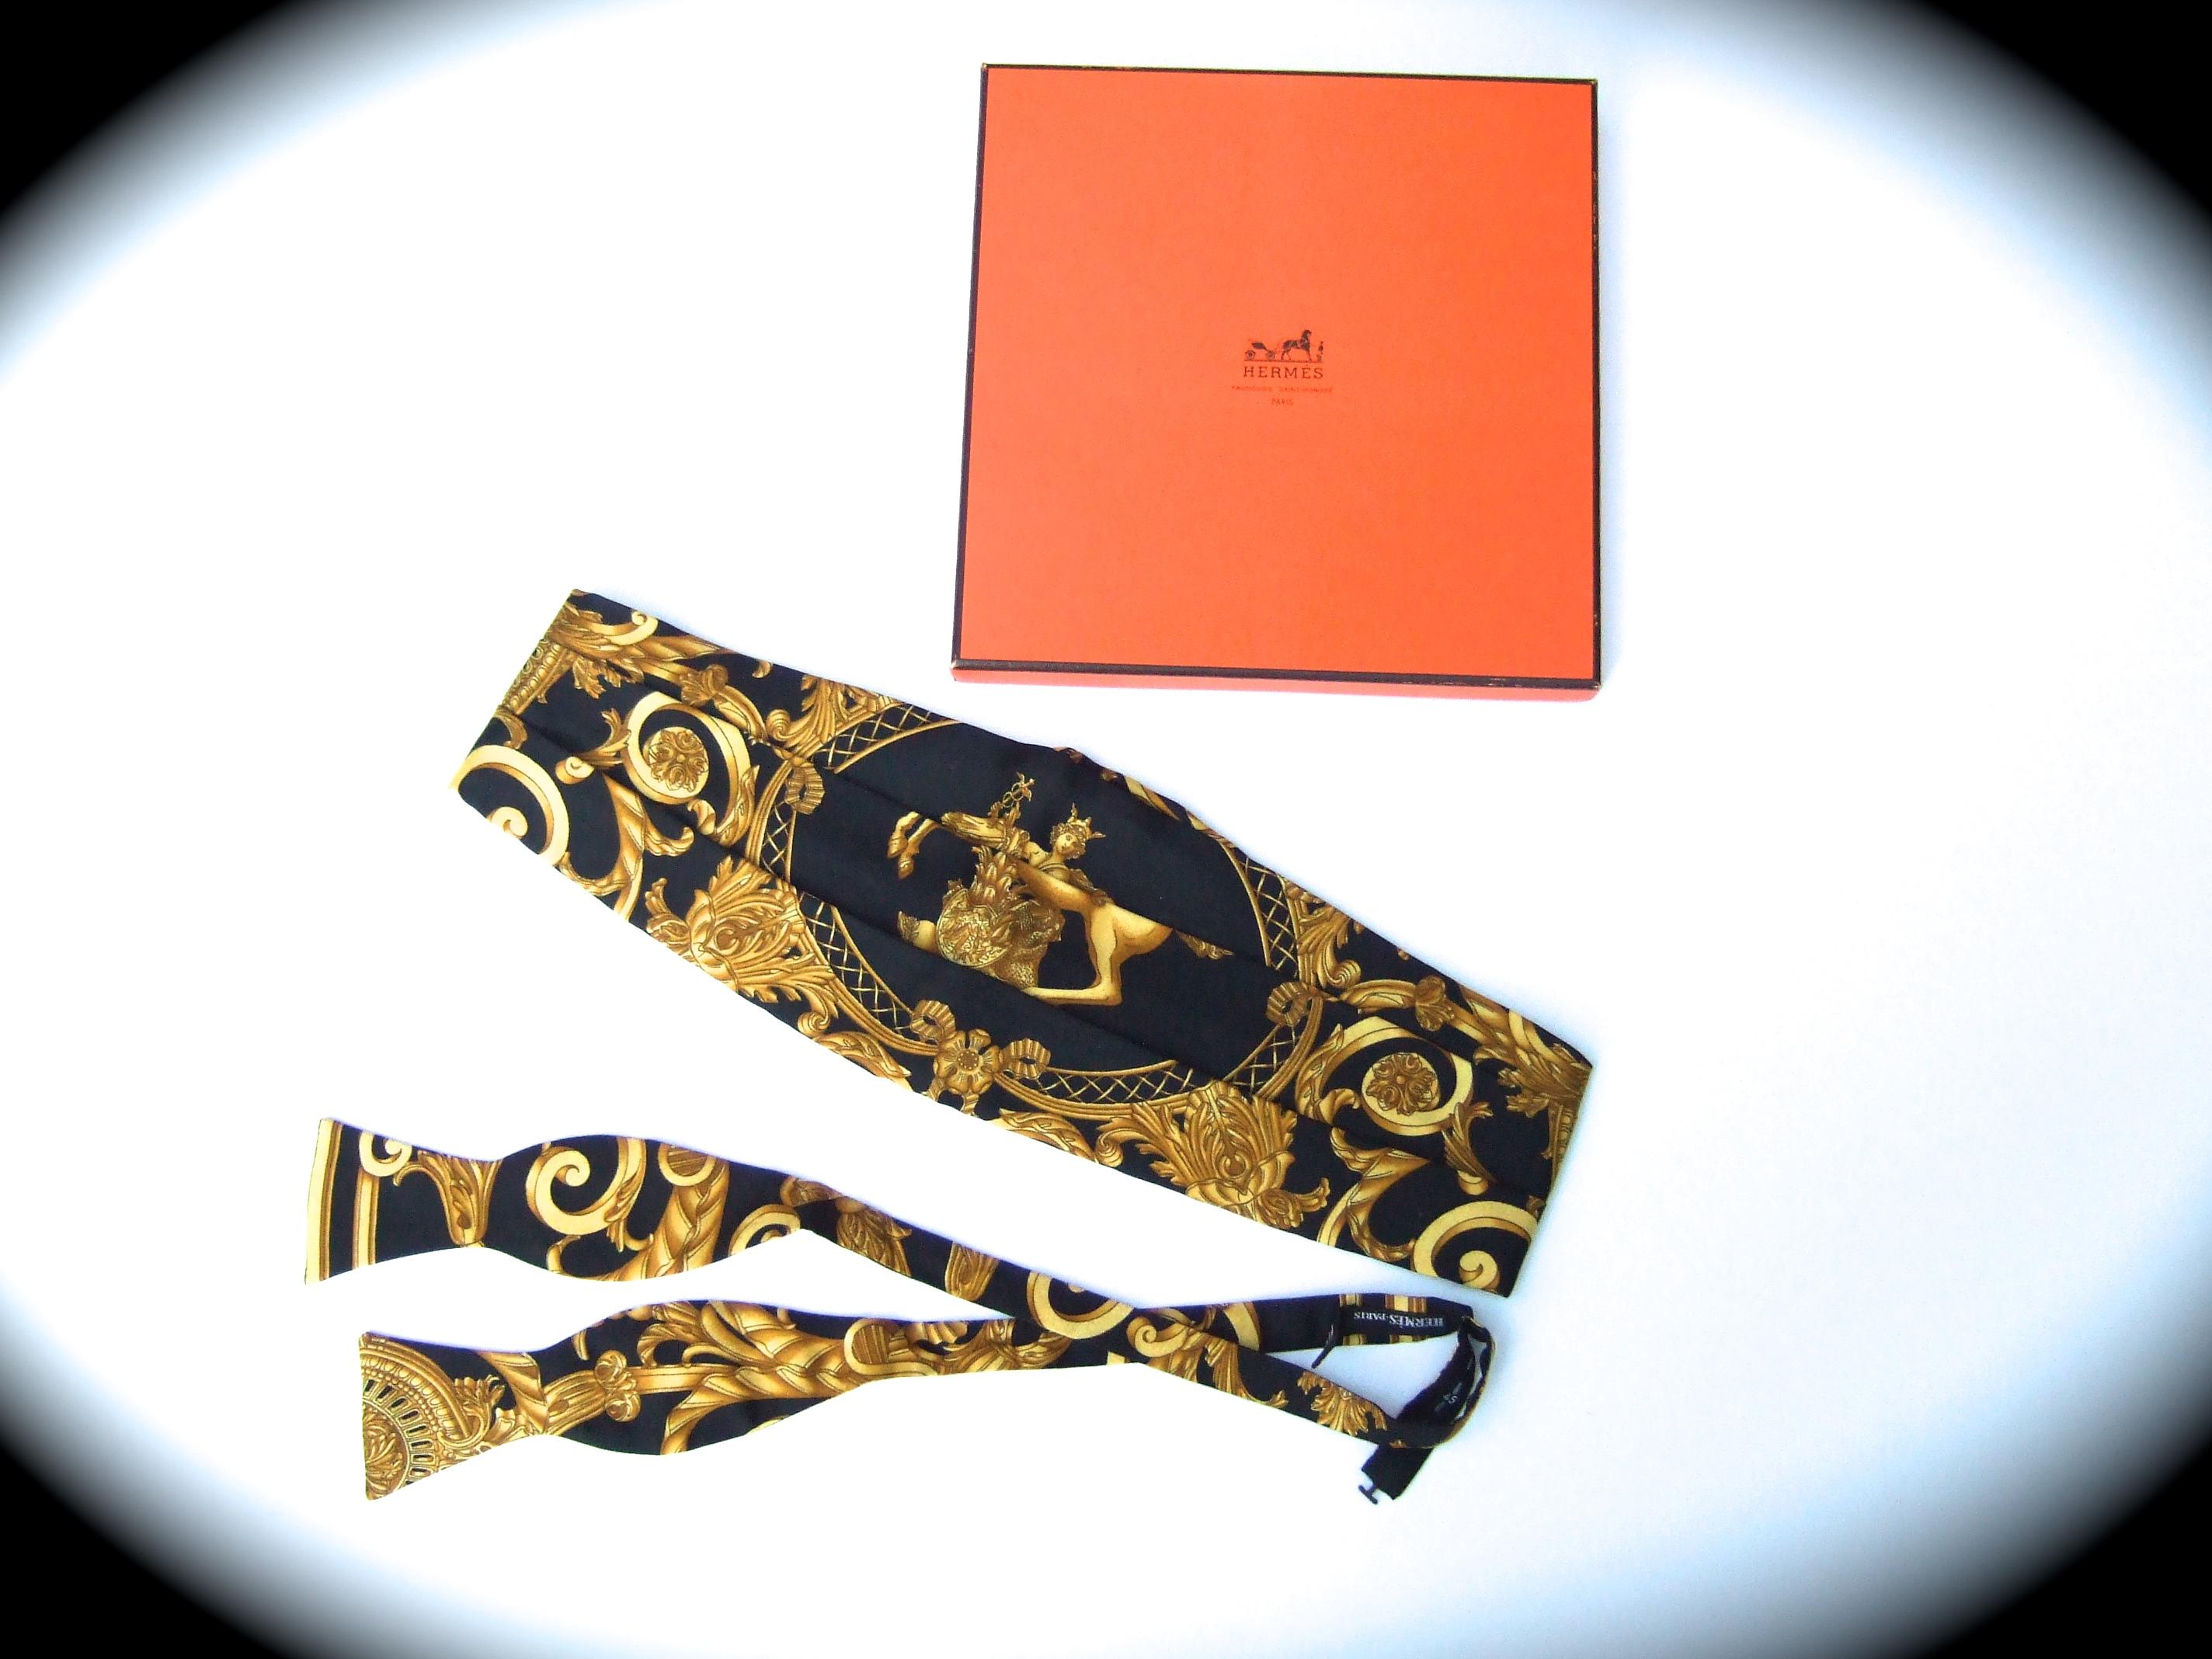 Hermes Paris Men's silk cummerbund & bow tie ensemble in Hermes box 
The elegant silk cummerbund set is illustrated with a mythical figure astride a majestic golden yellow horse

The ornate golden yellow scrolled rococo style designs are illuminated